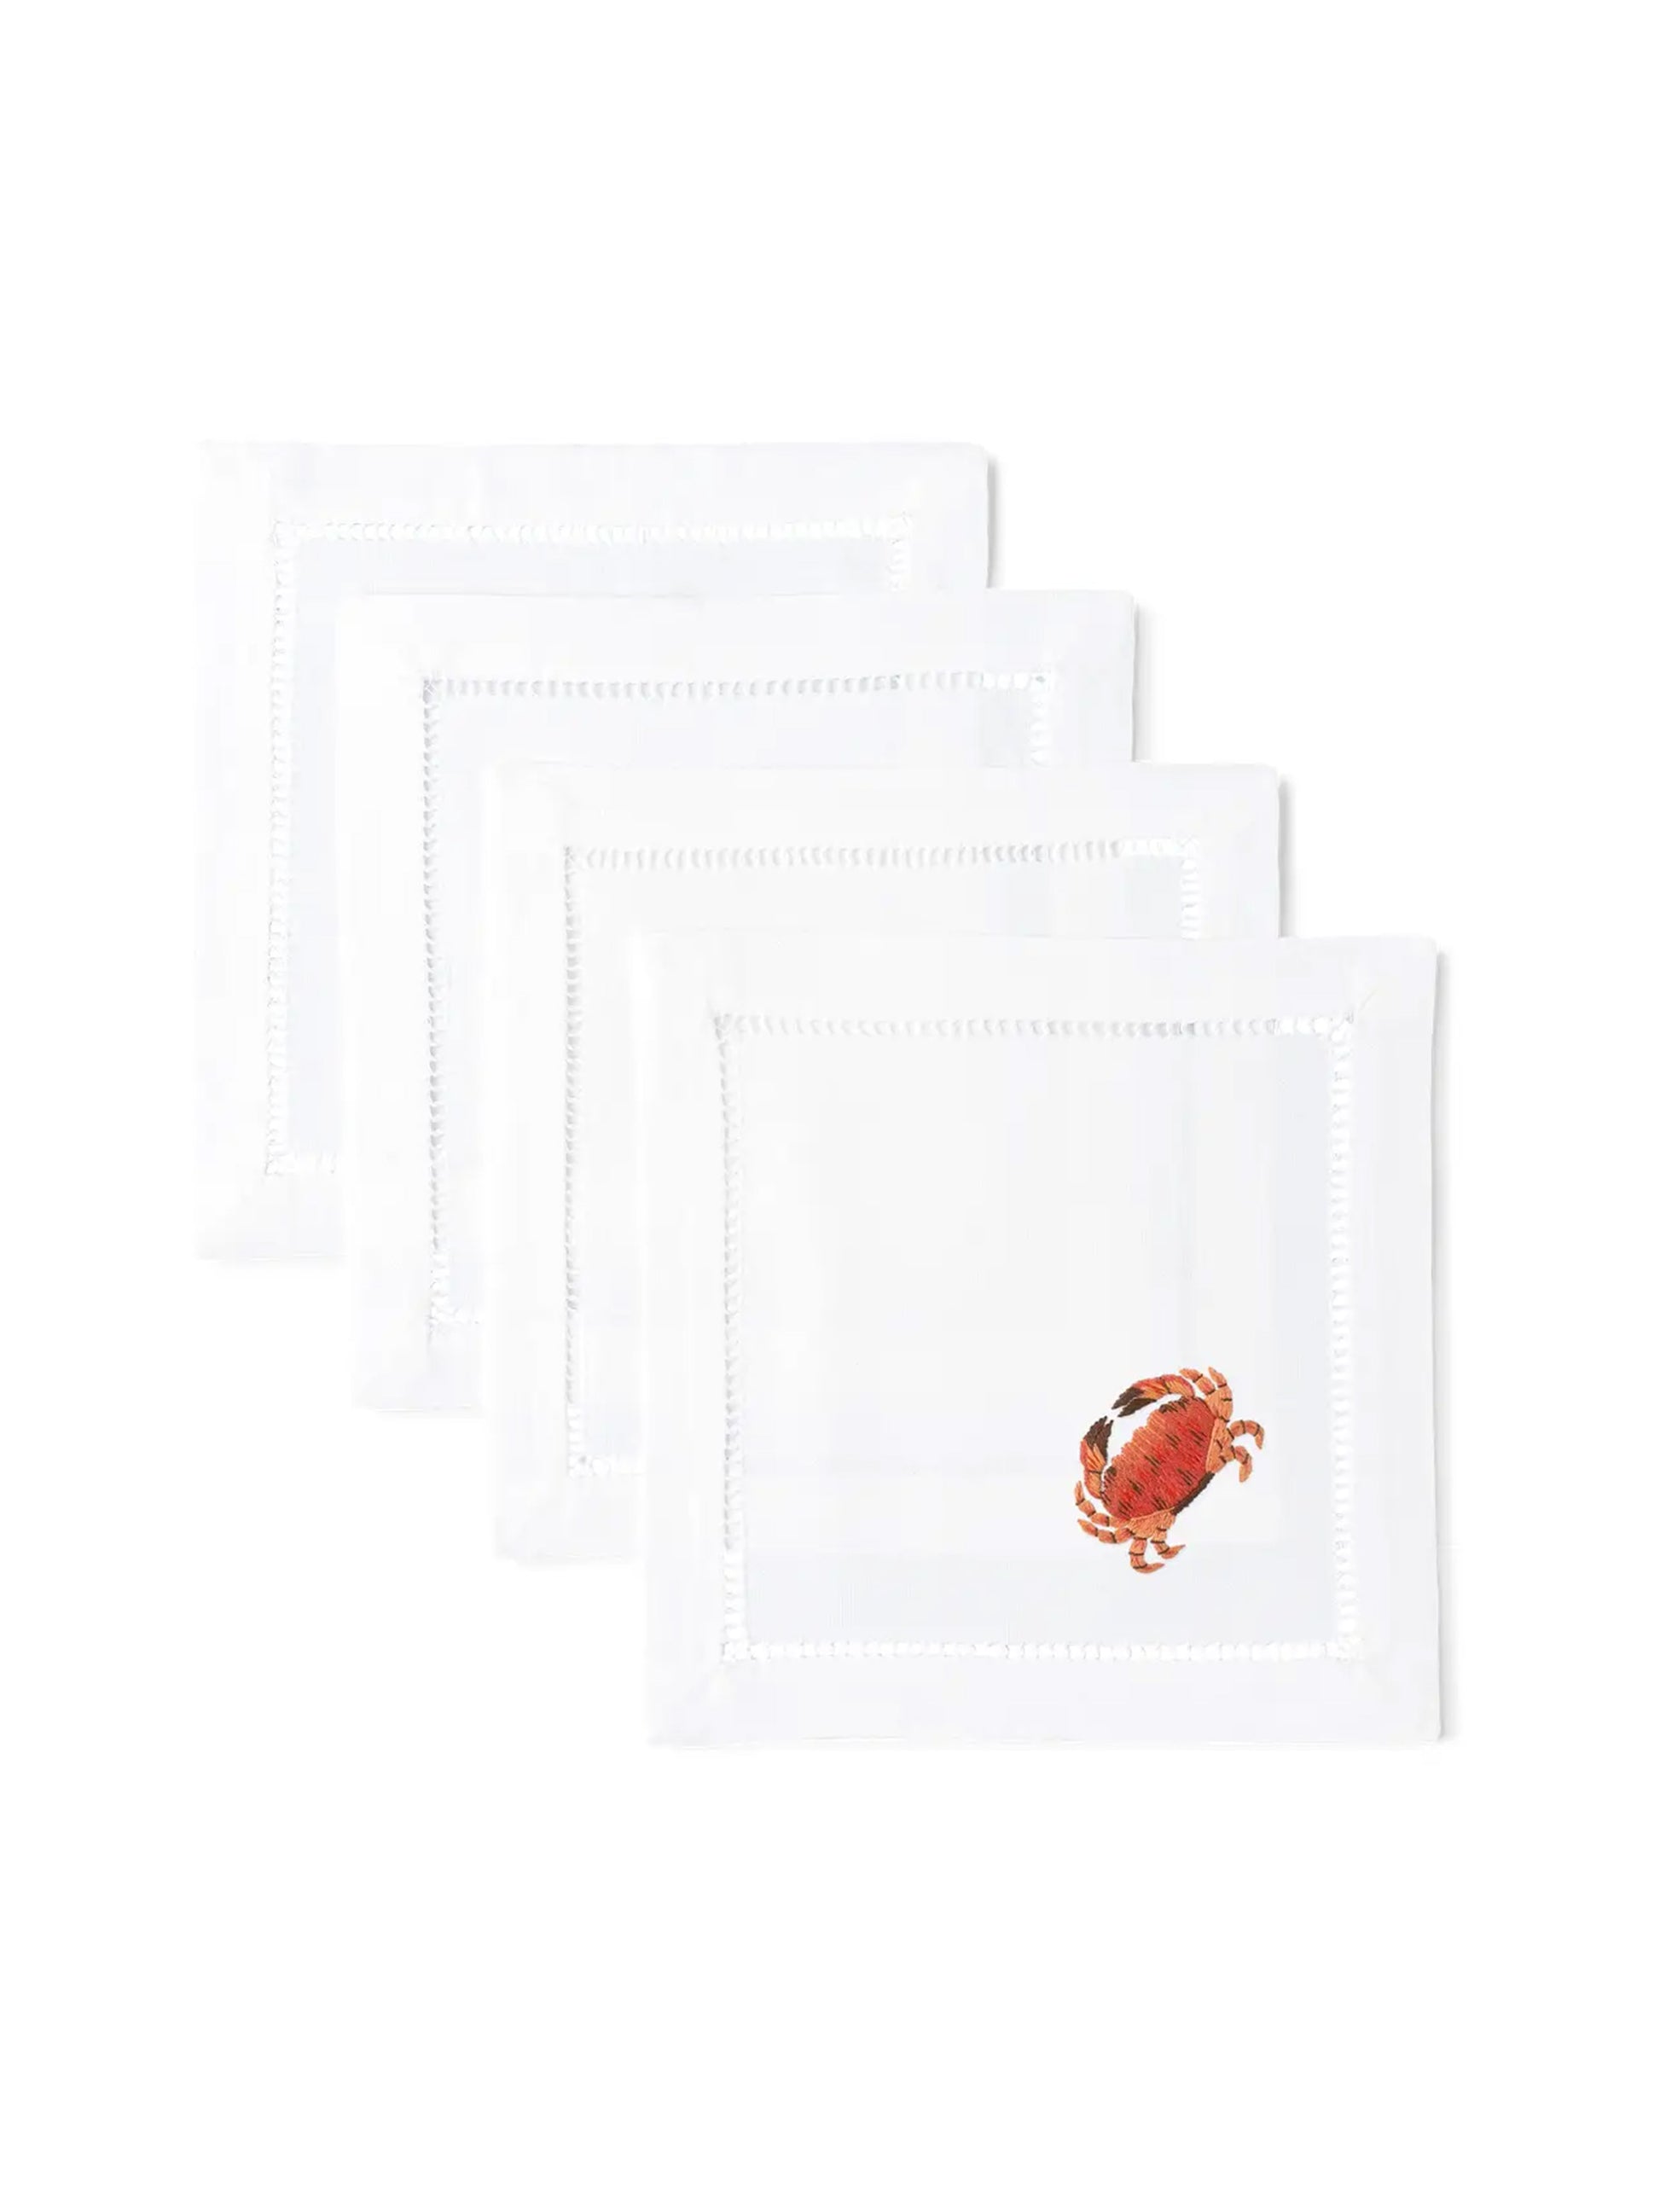 Embroidered Crab Cocktail Napkins Weston Table